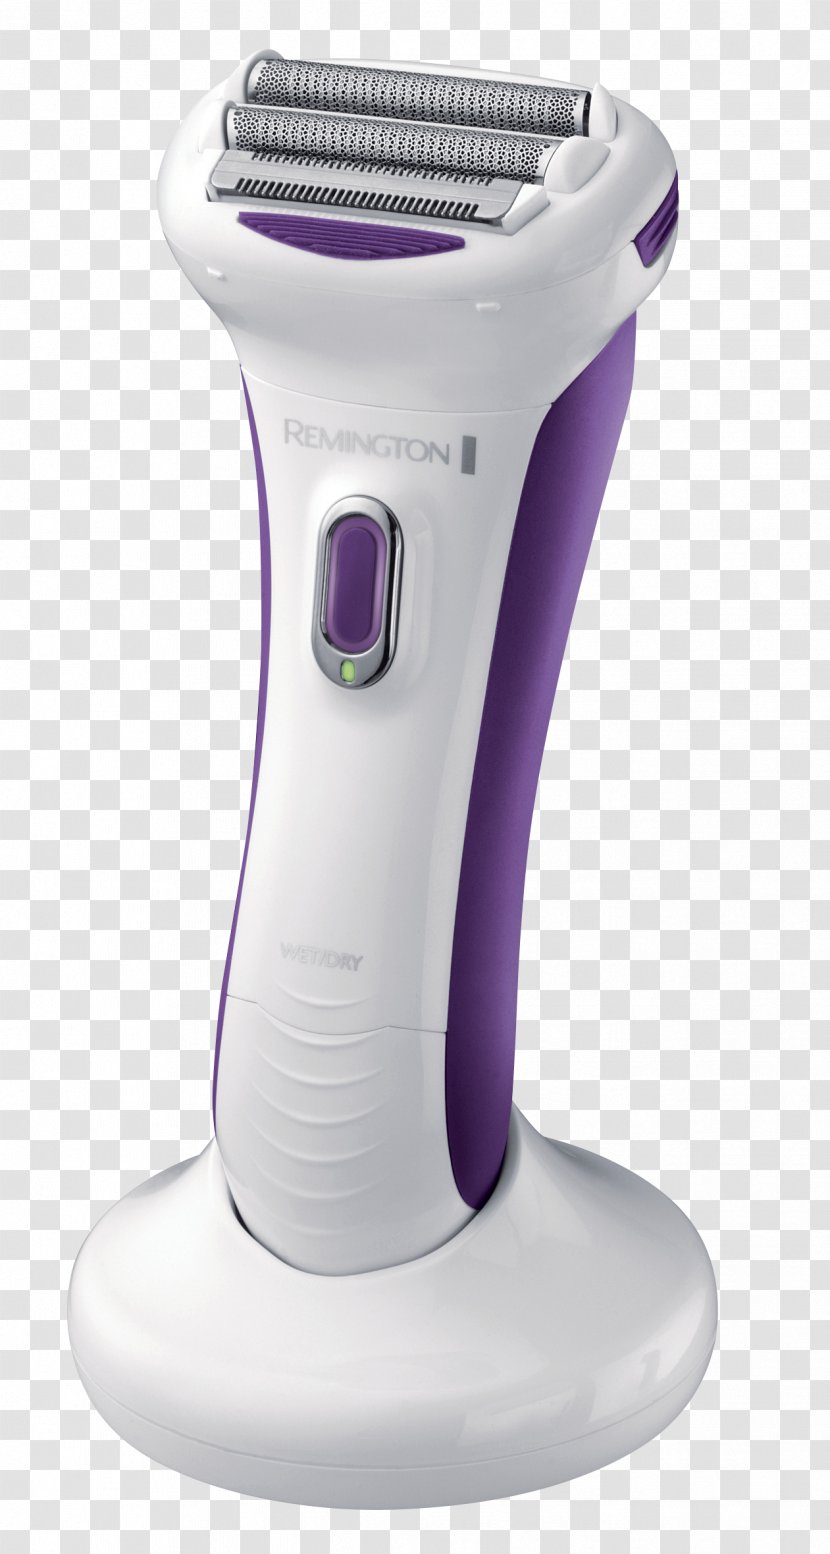 Electric Razors & Hair Trimmers Ladyshave Remington Smooth Silky WDF5030 Shaving WDF4840 - Arms - Razor Transparent PNG